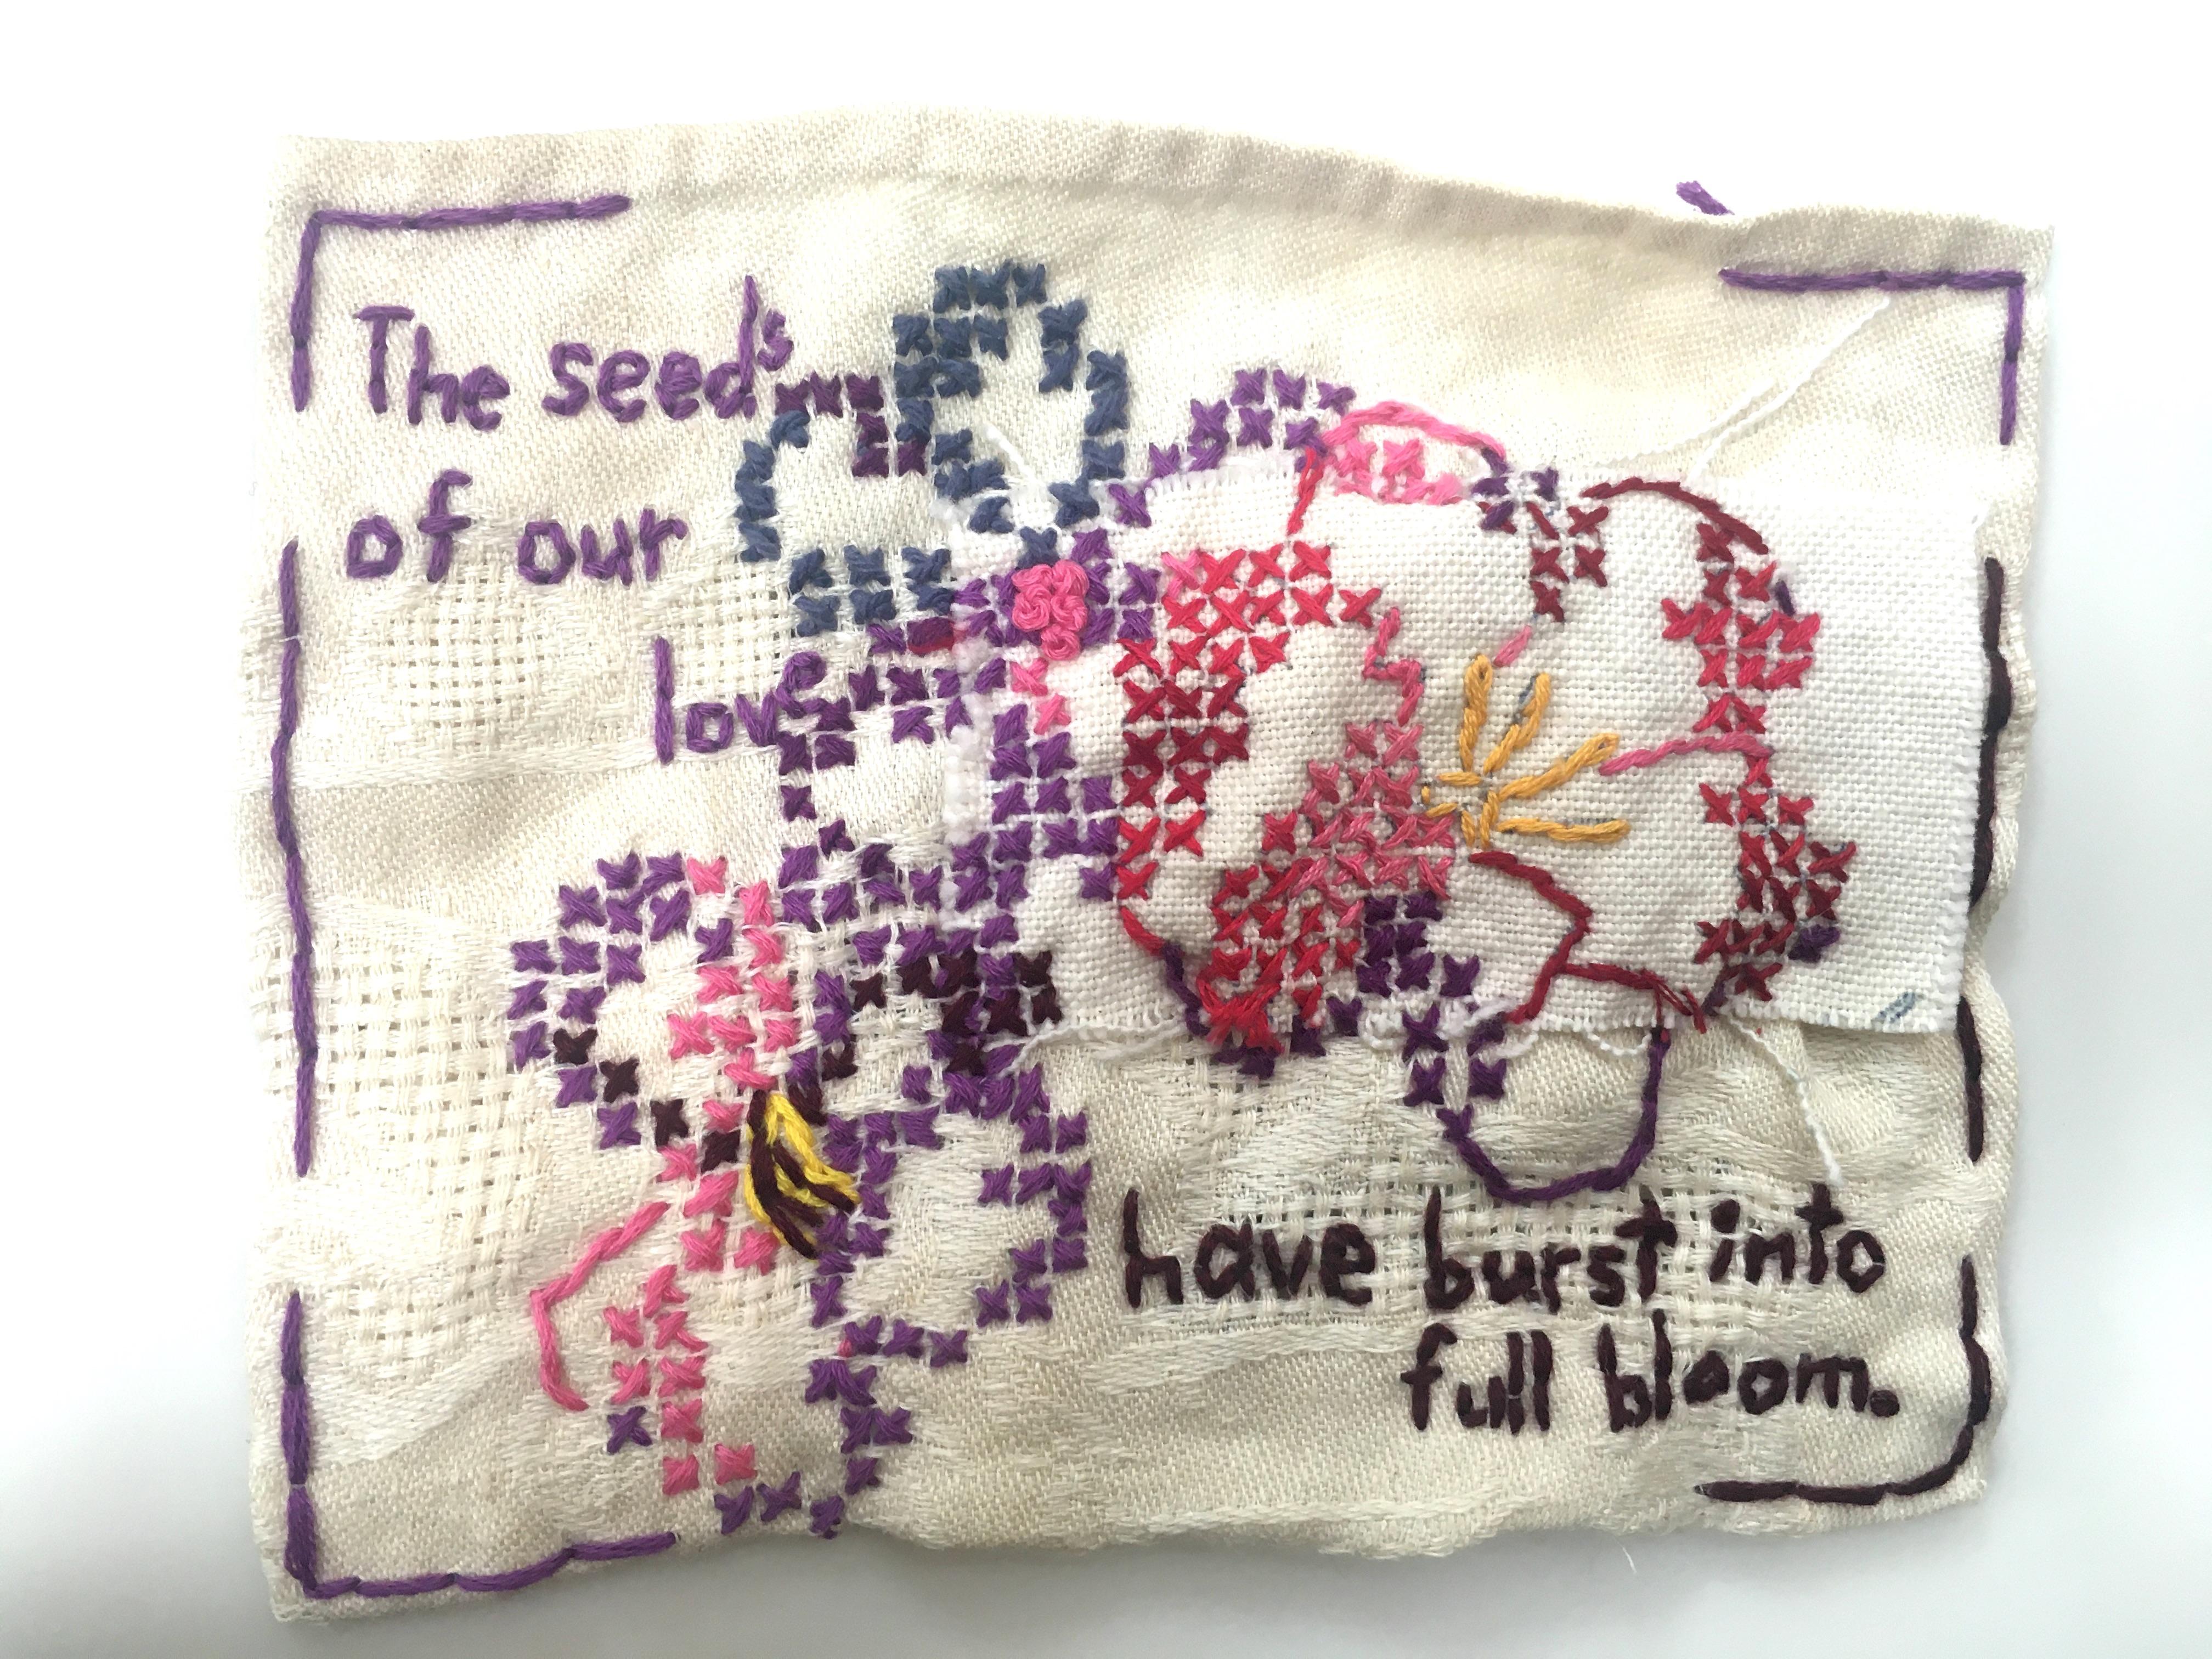 Seeds of Love - love narrative embroidery with flowers on beige vintage fabric - Mixed Media Art by Iviva Olenick